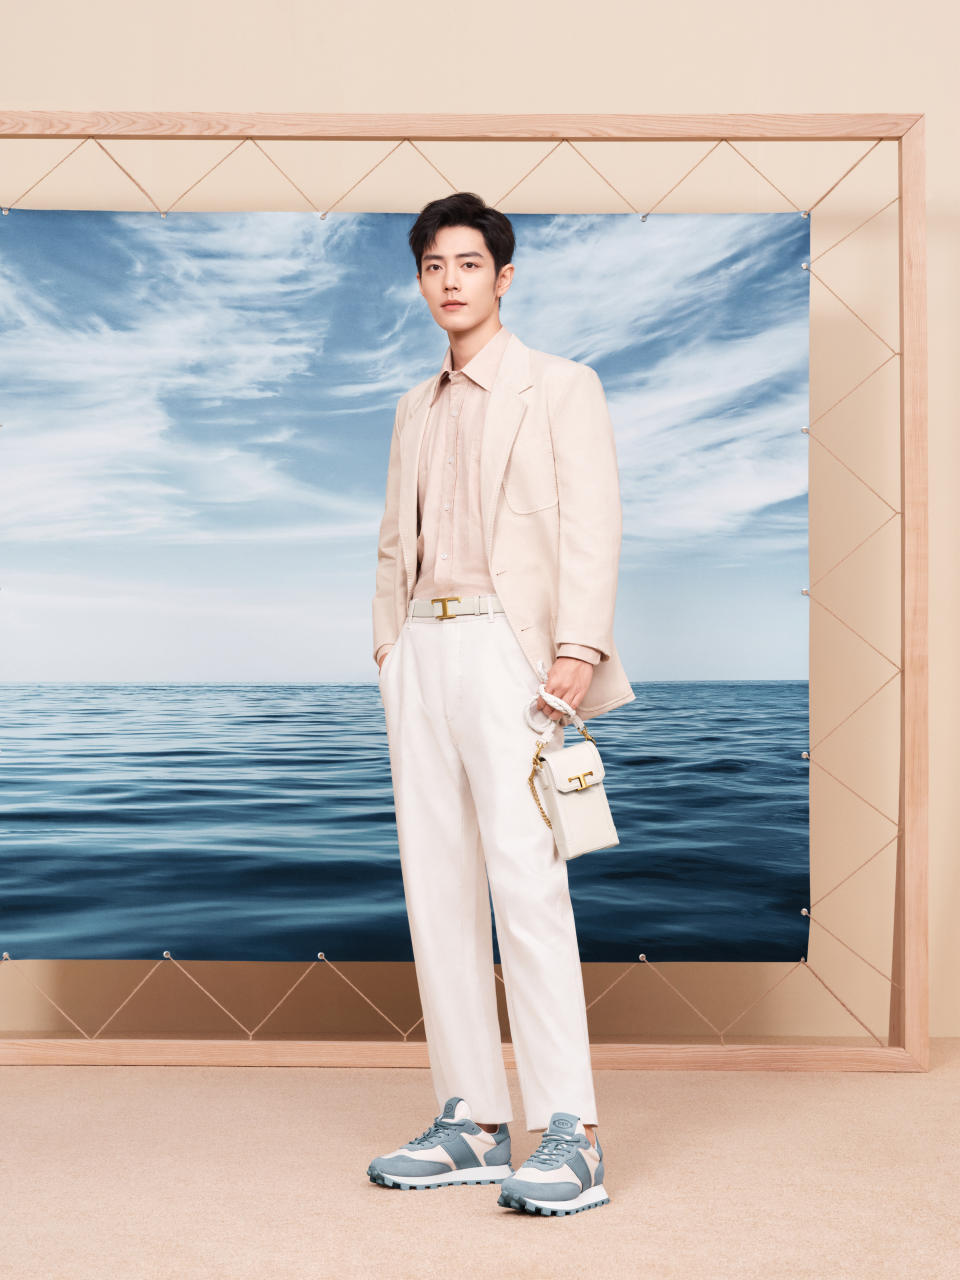 Chinese actor and Tod’s brand ambassador Xiao Zhan stars in the campaign, promoting his first capsule collection with the Italian brand. - Credit: Courtesy